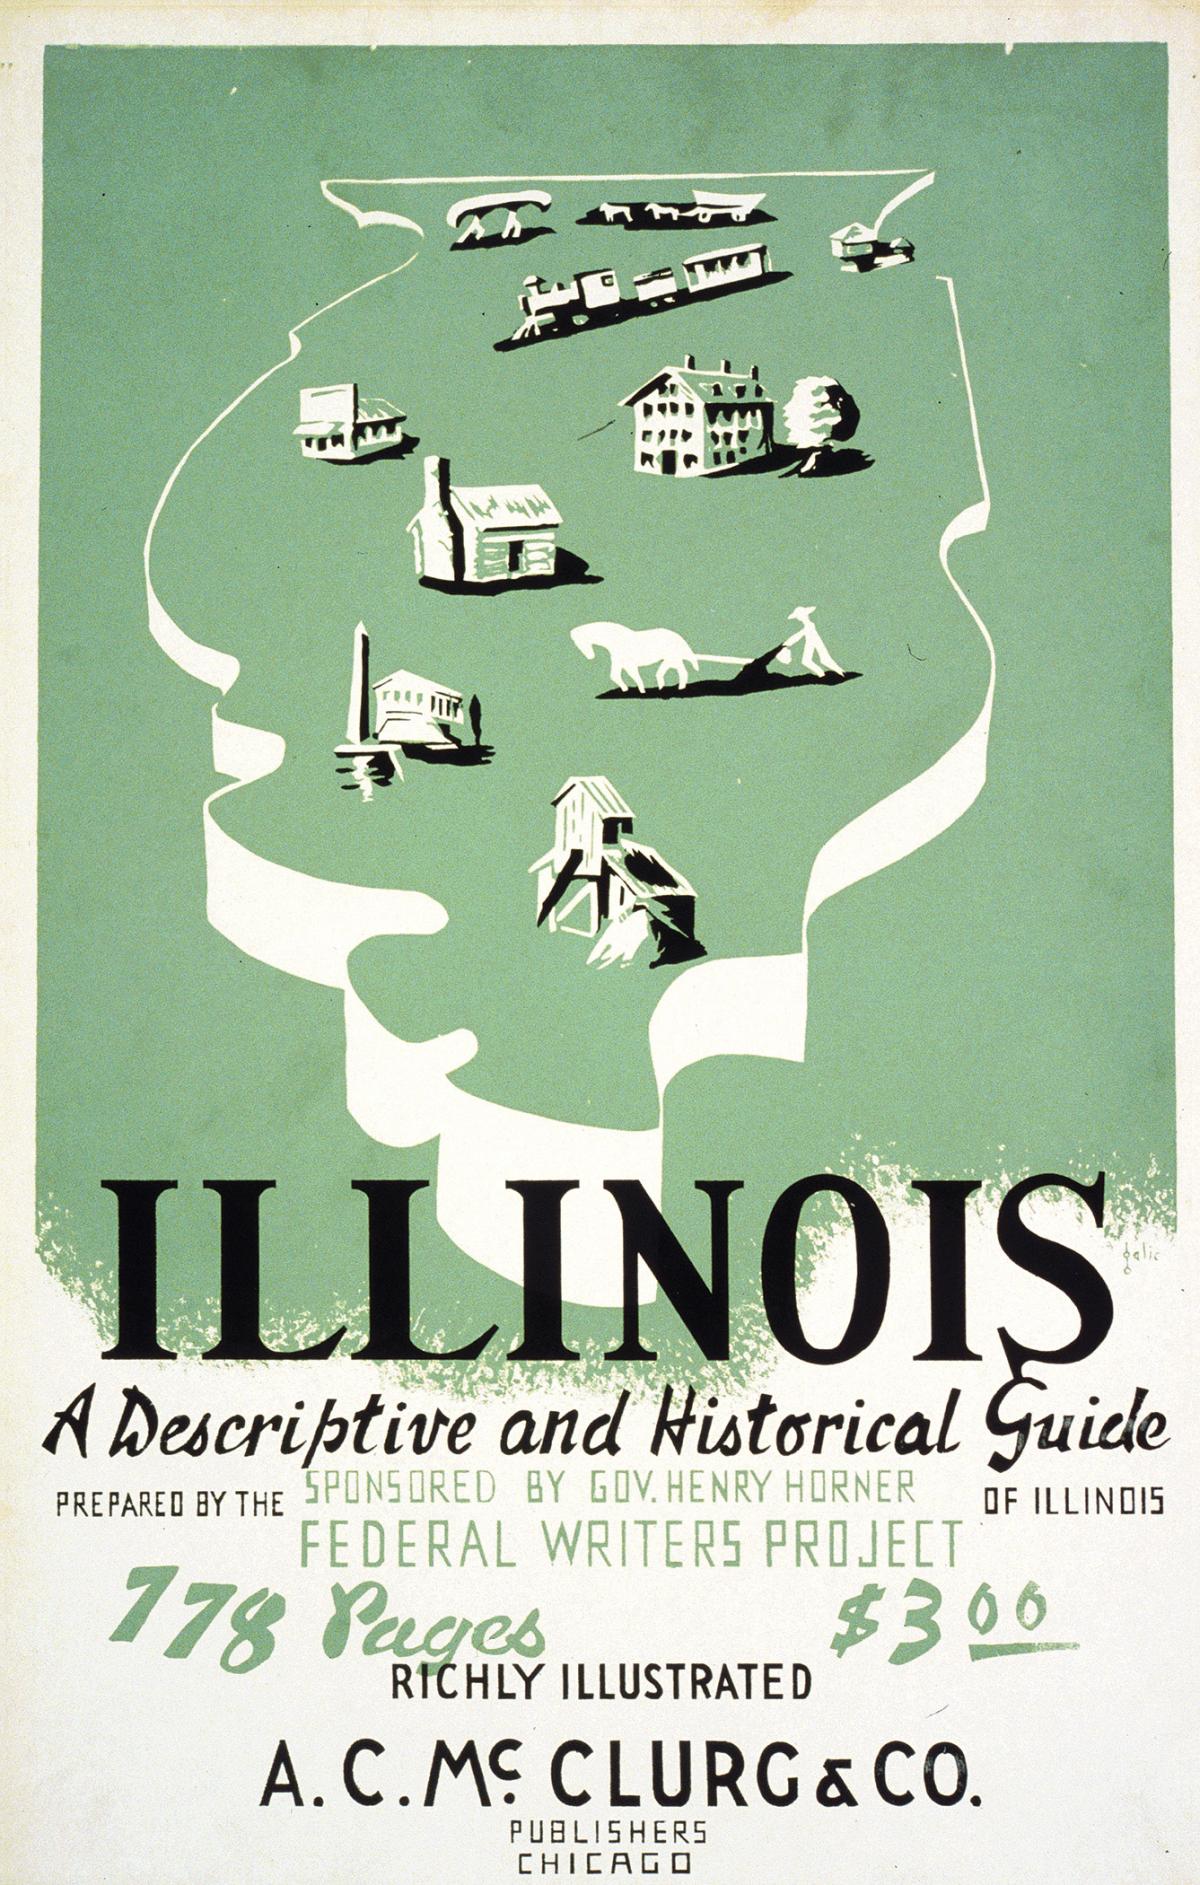 Publicity Poster for the Land of Lincoln